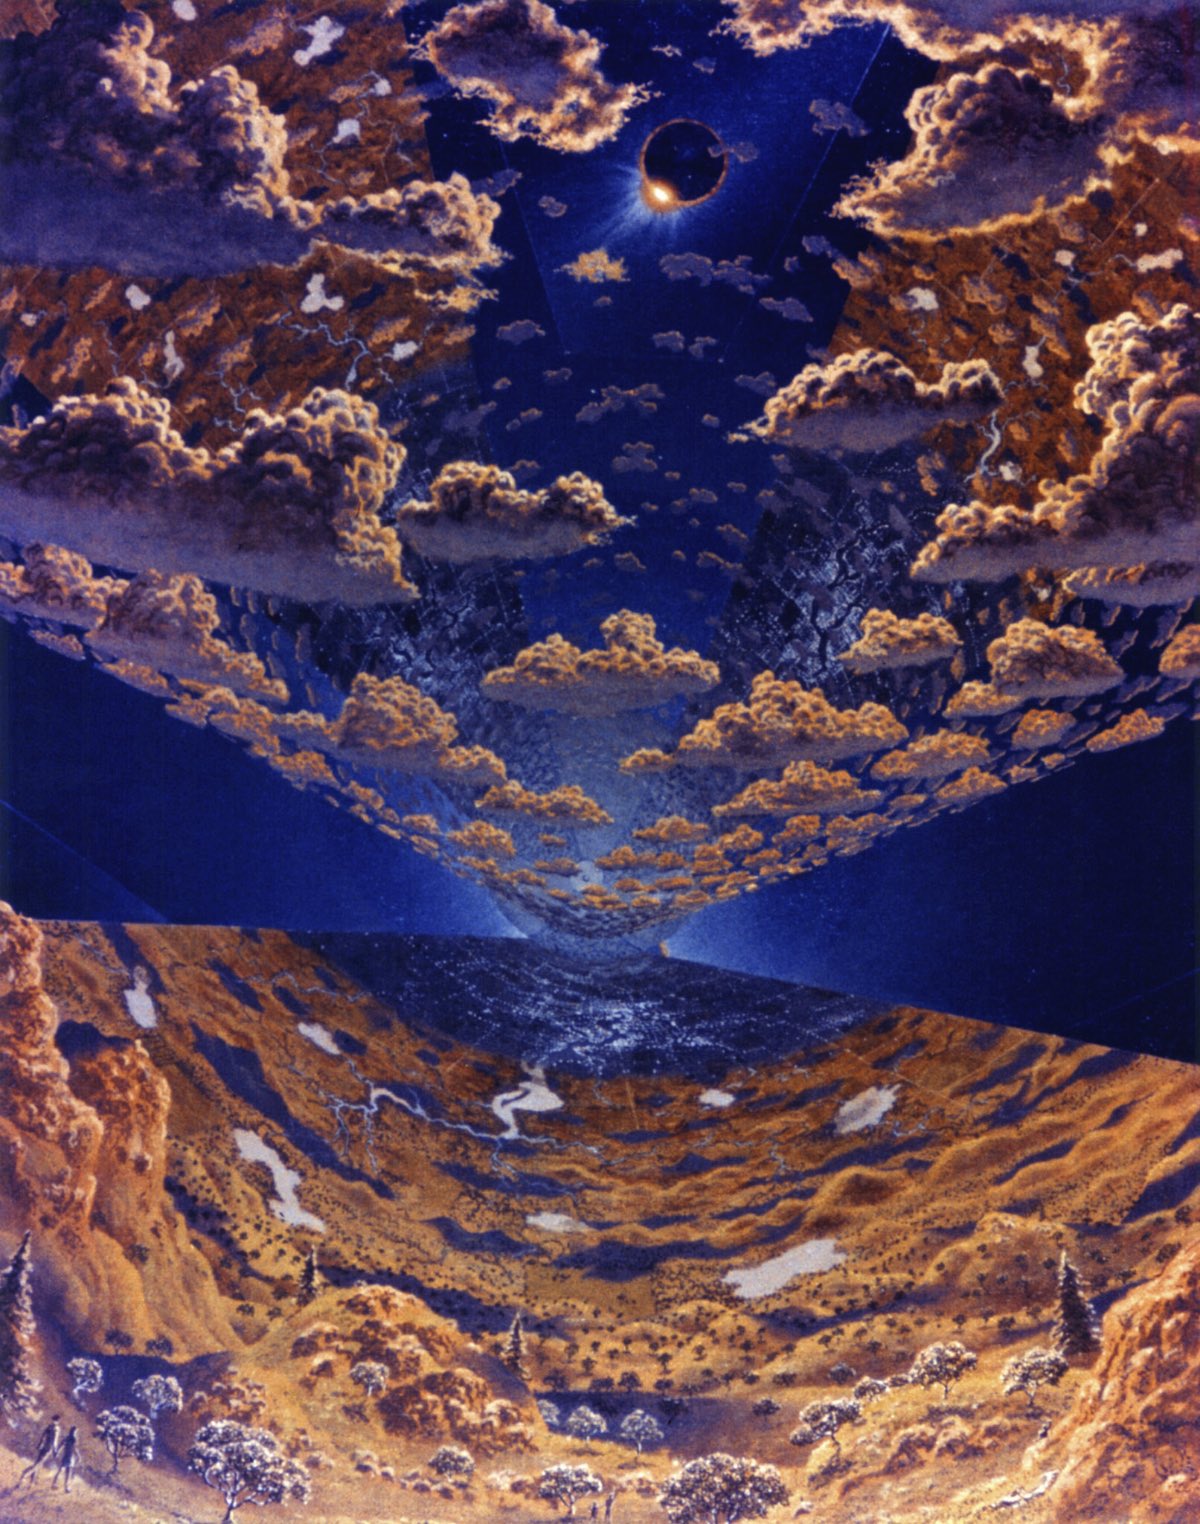 Cylinder Eclipse. Eclipse of the sun with view of clouds and vegetation. Art work: Don Davis. Credit: NASA Ames Research Center. NASA ID AC75-1920